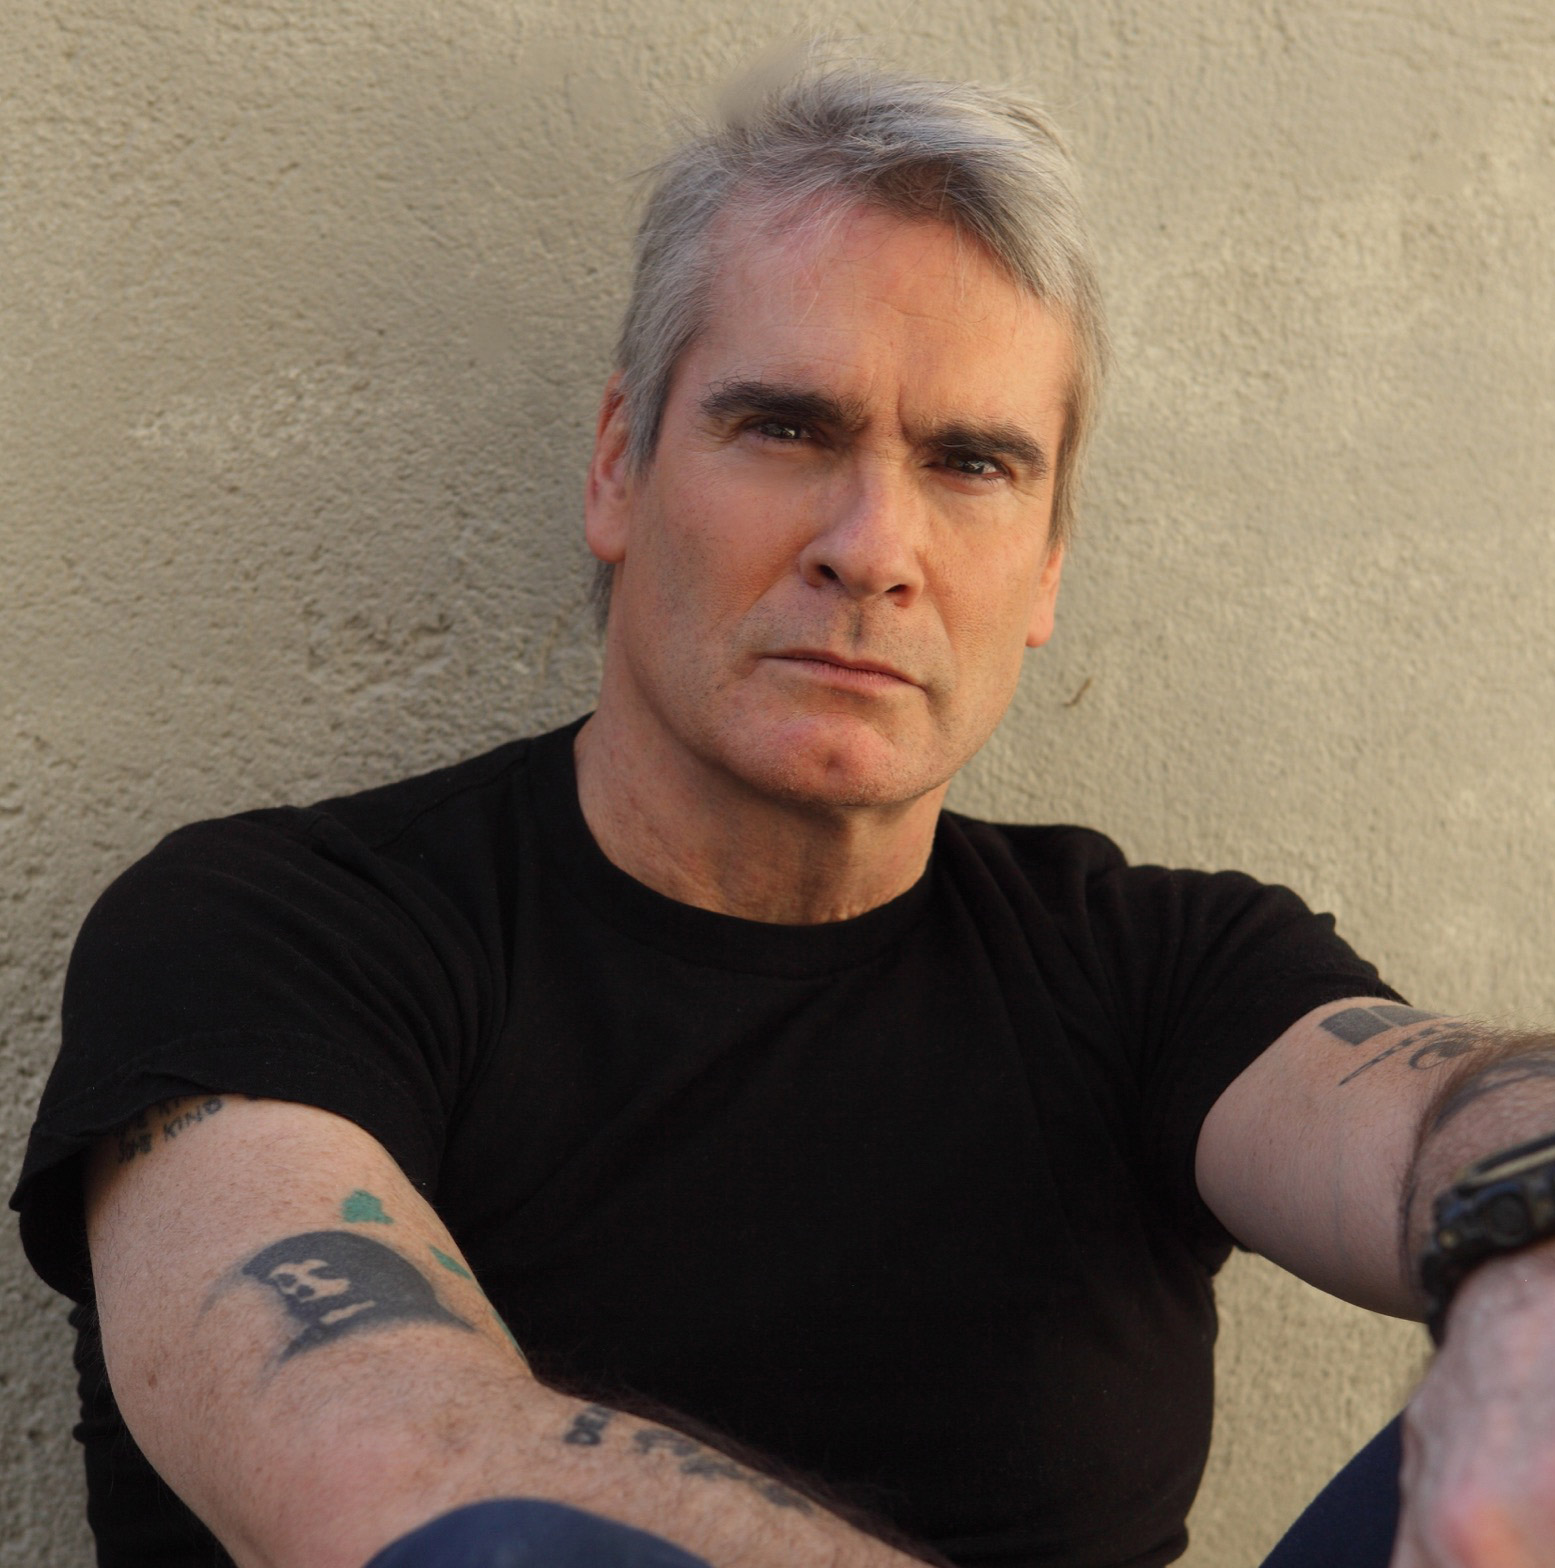 Henry Rollins photo by Heidi May